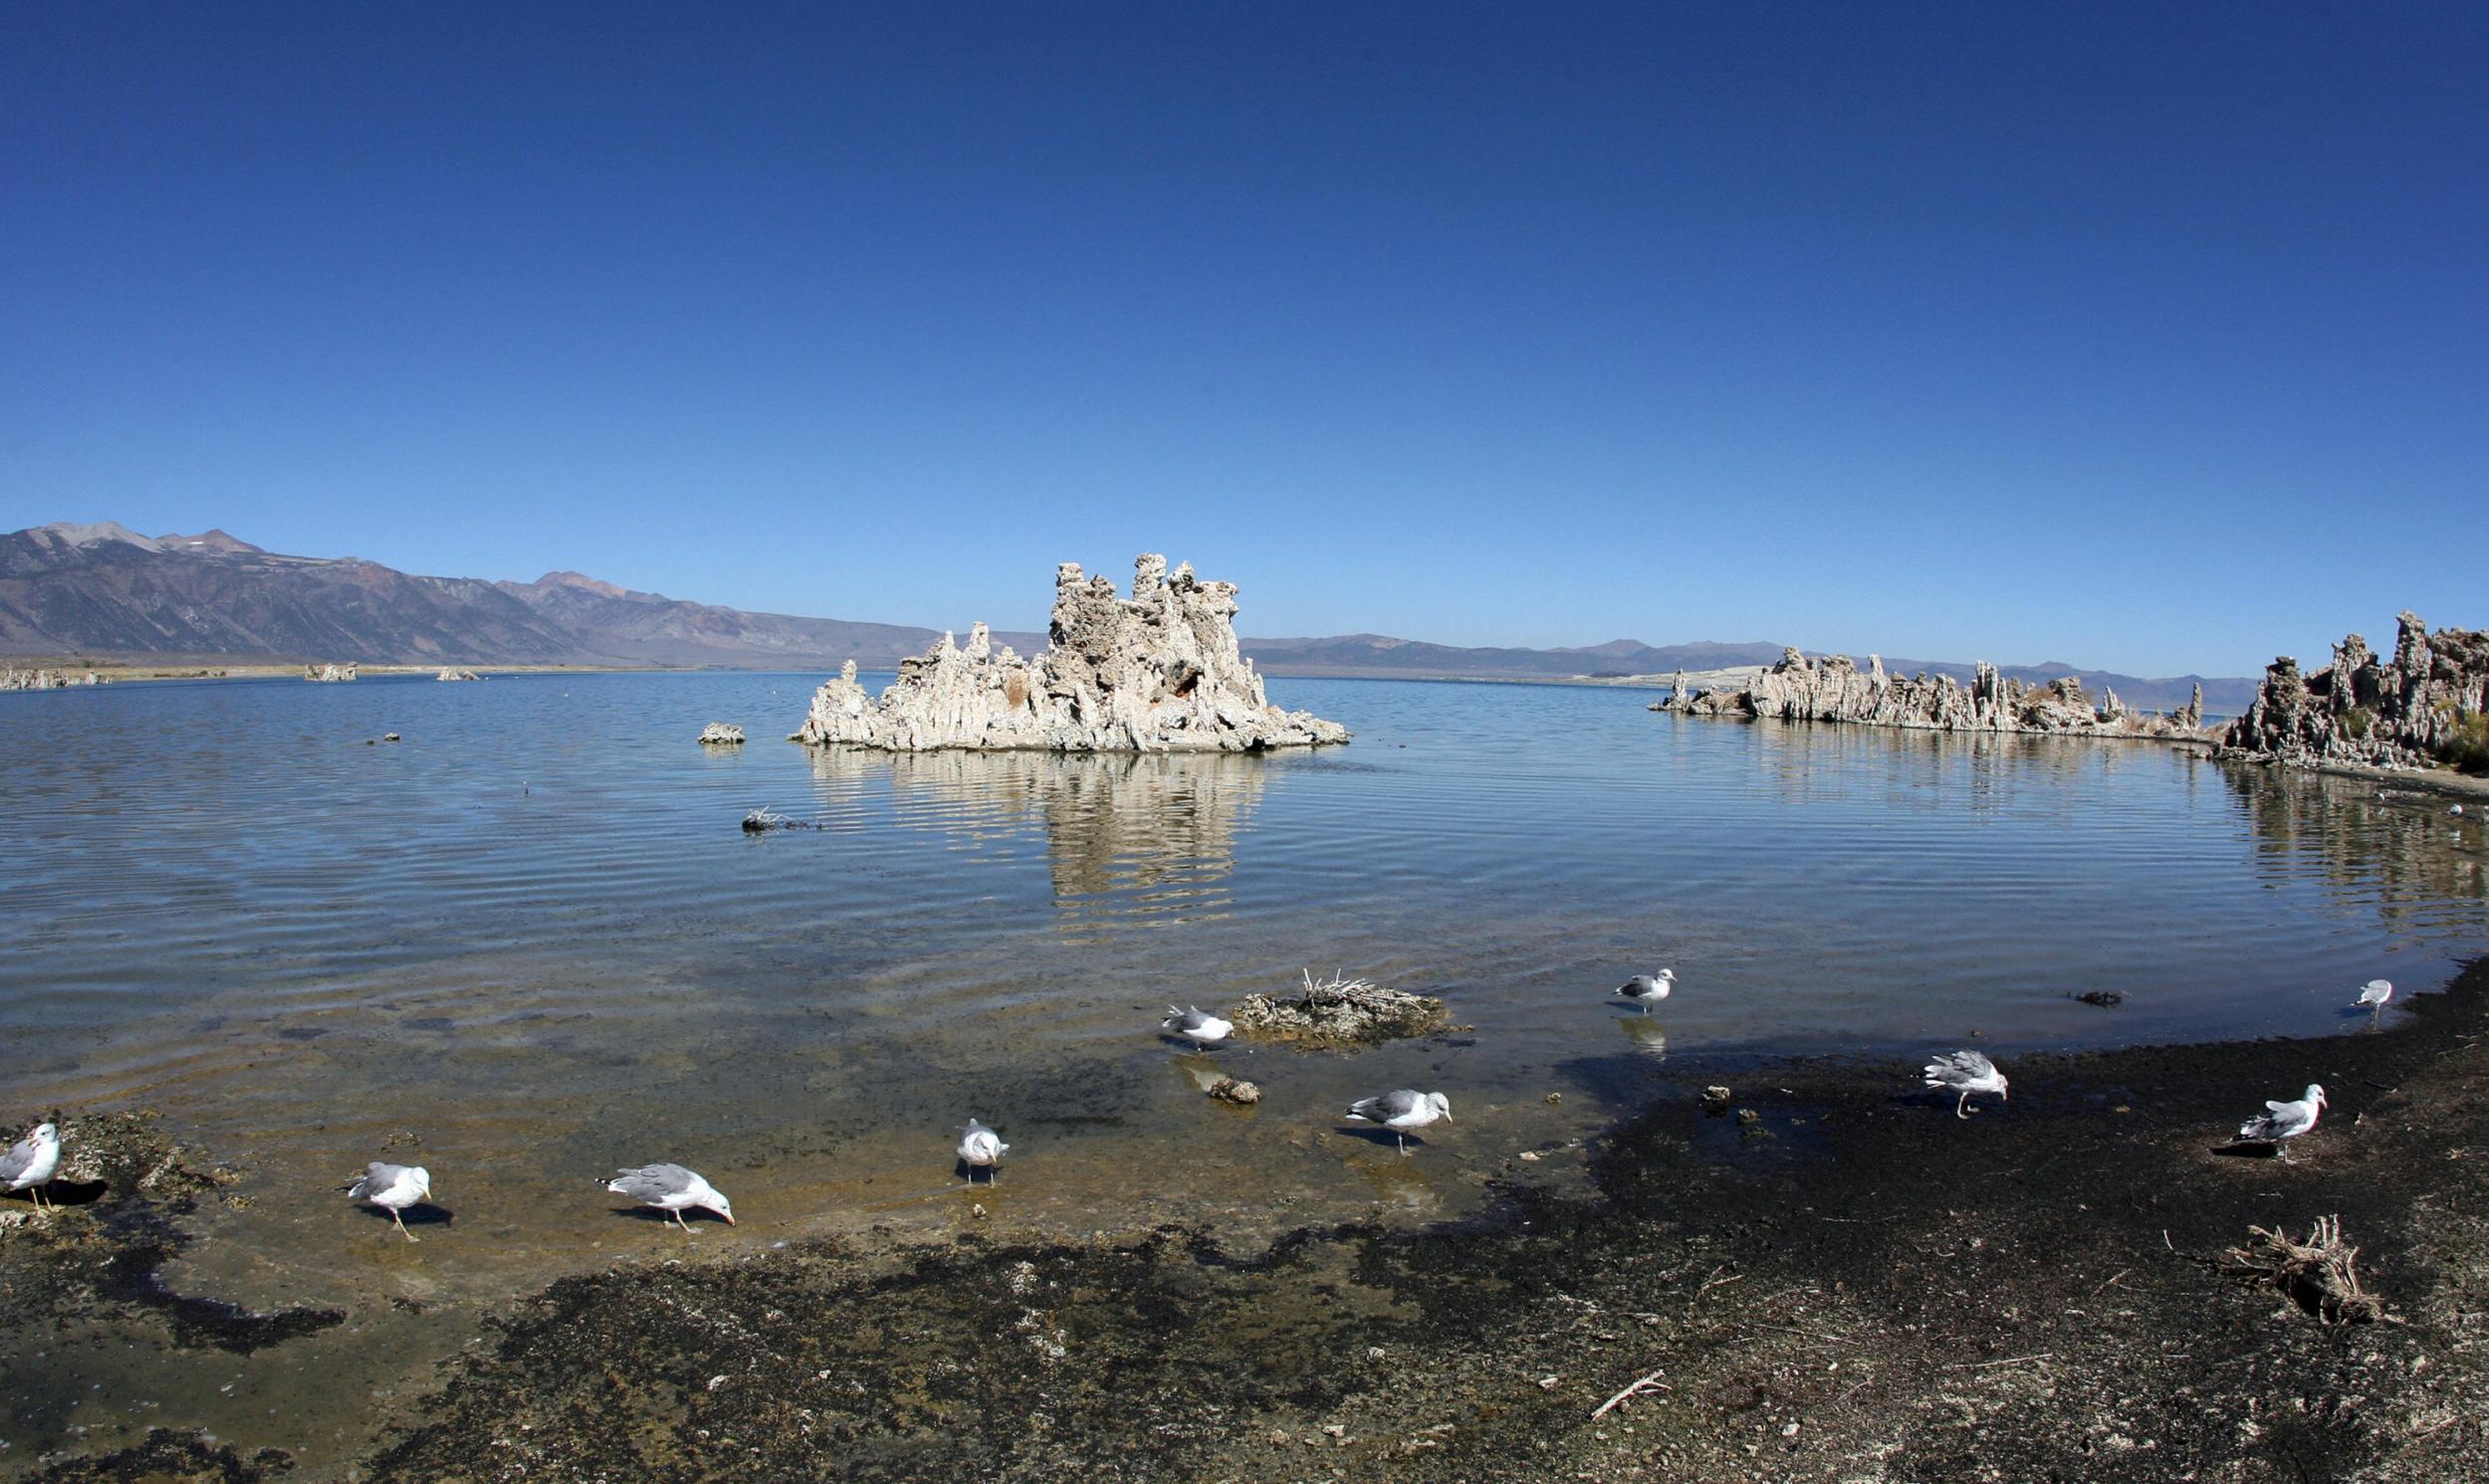 Mono Lake, located in the Eastern Sierras of California, is three times as salty as the ocean and has an alkaline pH of 10